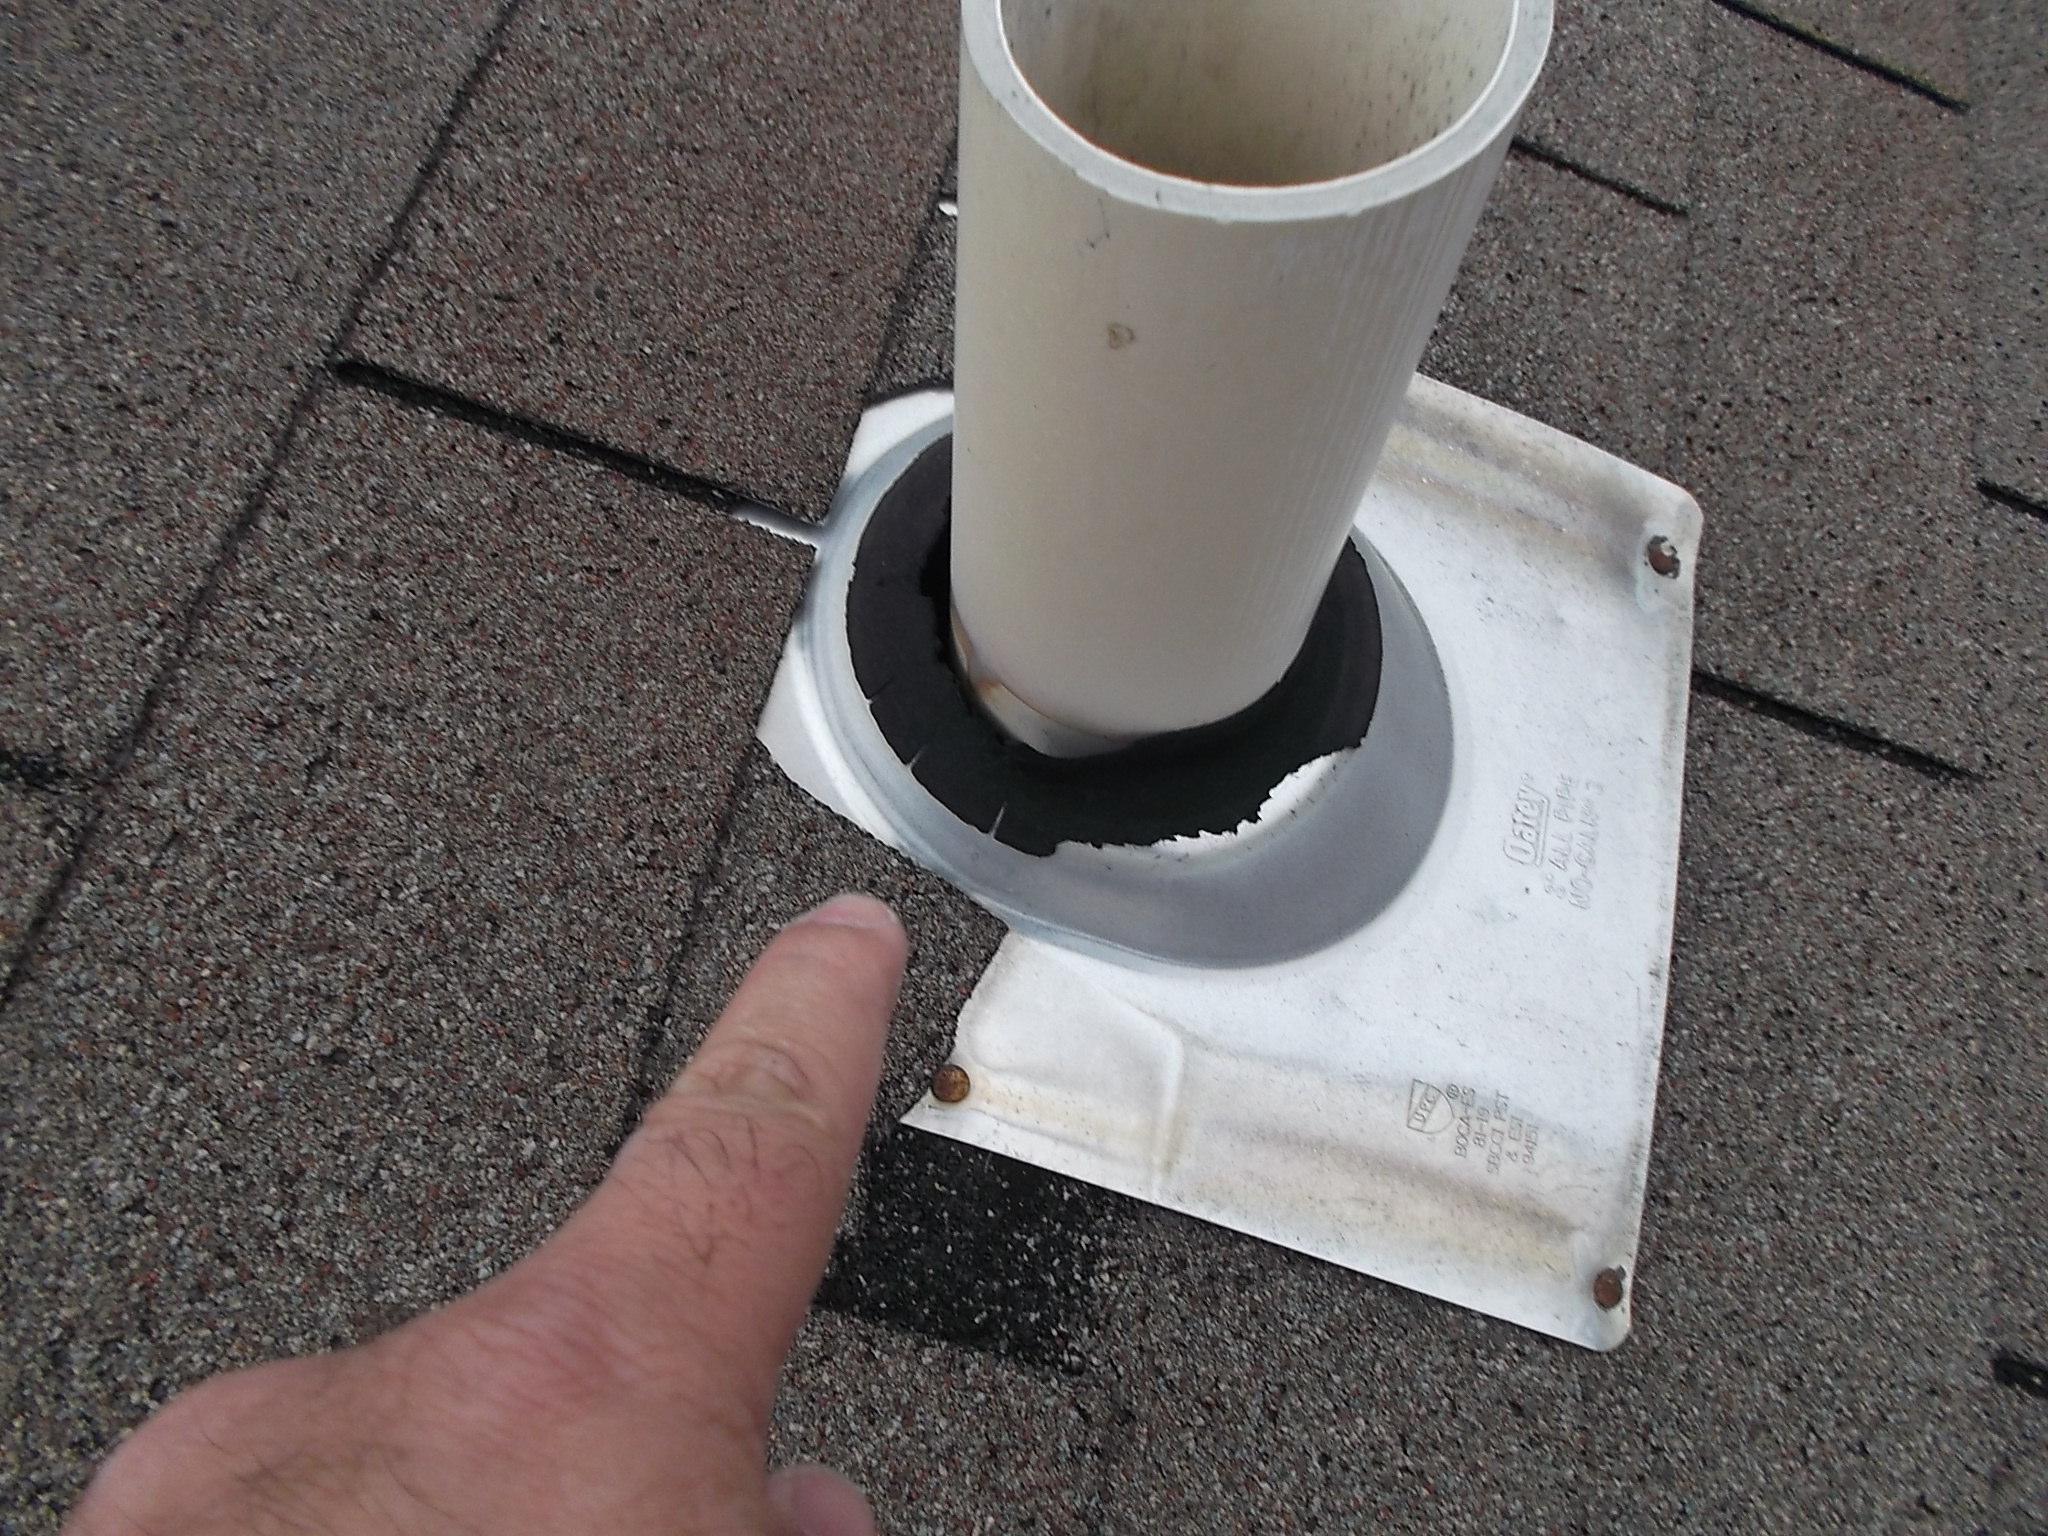 rotted rubber boot allowing water penetration to attic